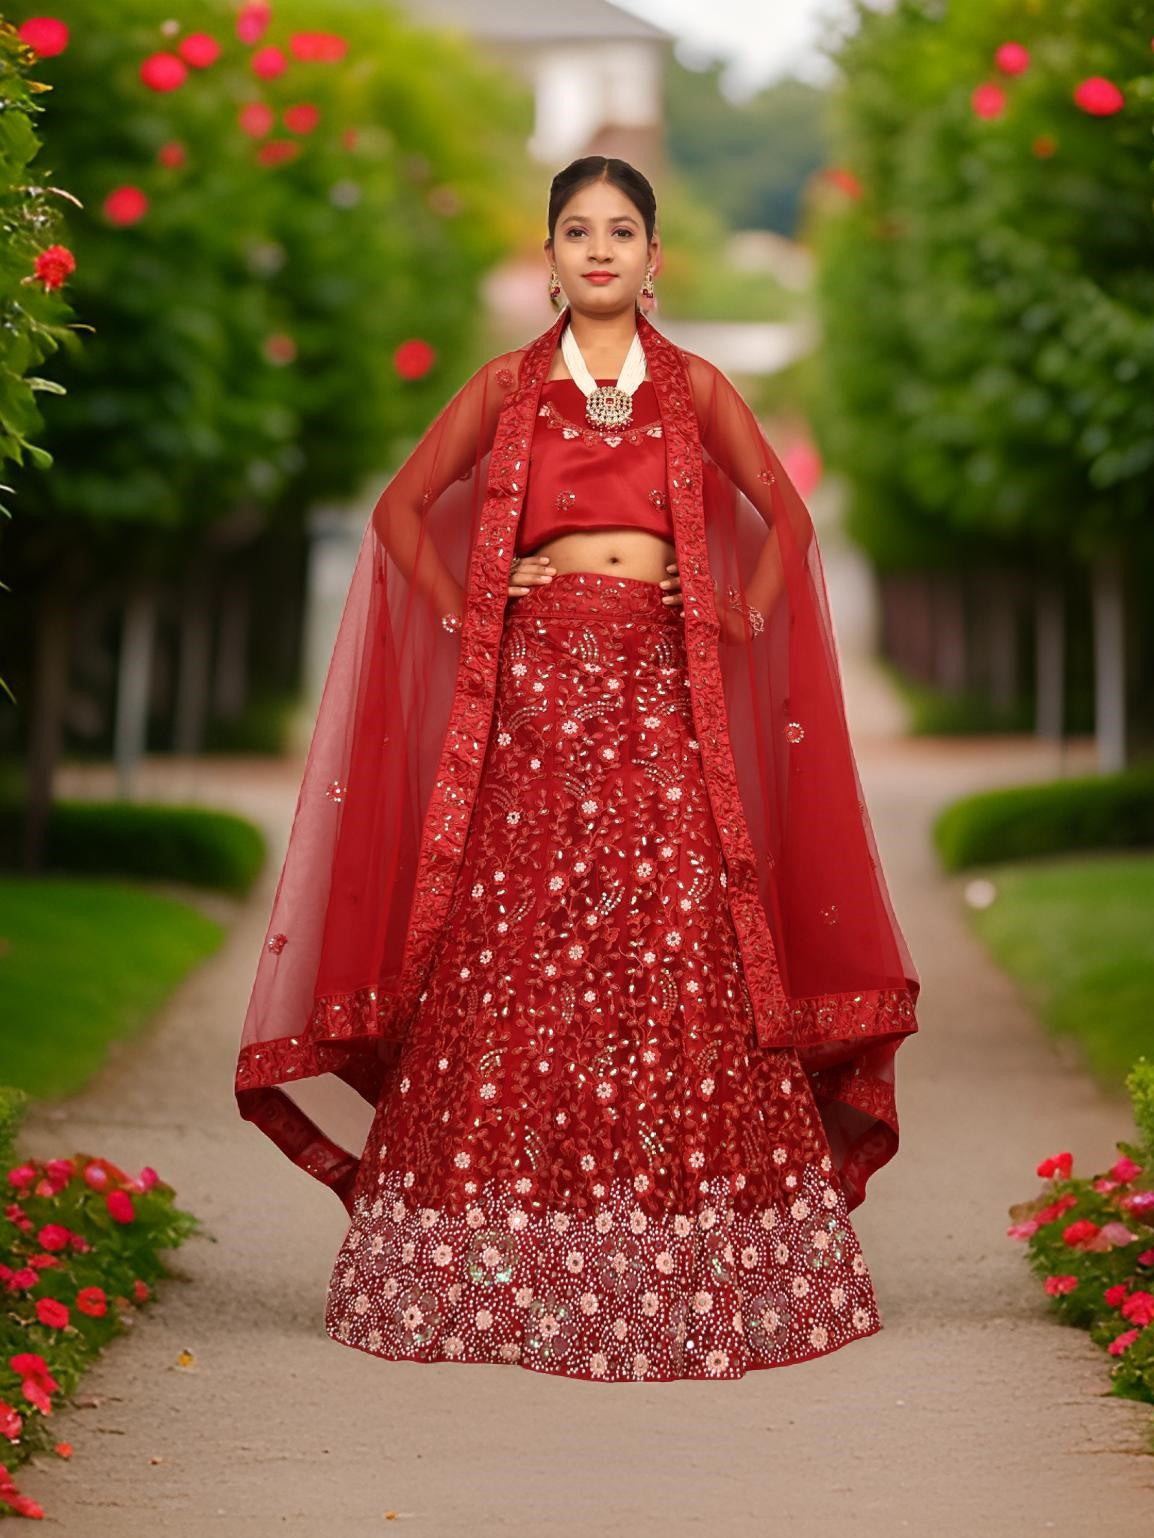 Semi-Stitched Lehenga with Sequin &amp; Embroidery Work by Shreekama Maroon Semi-Stitched Lehenga for Party Festival Wedding Occasion in Noida